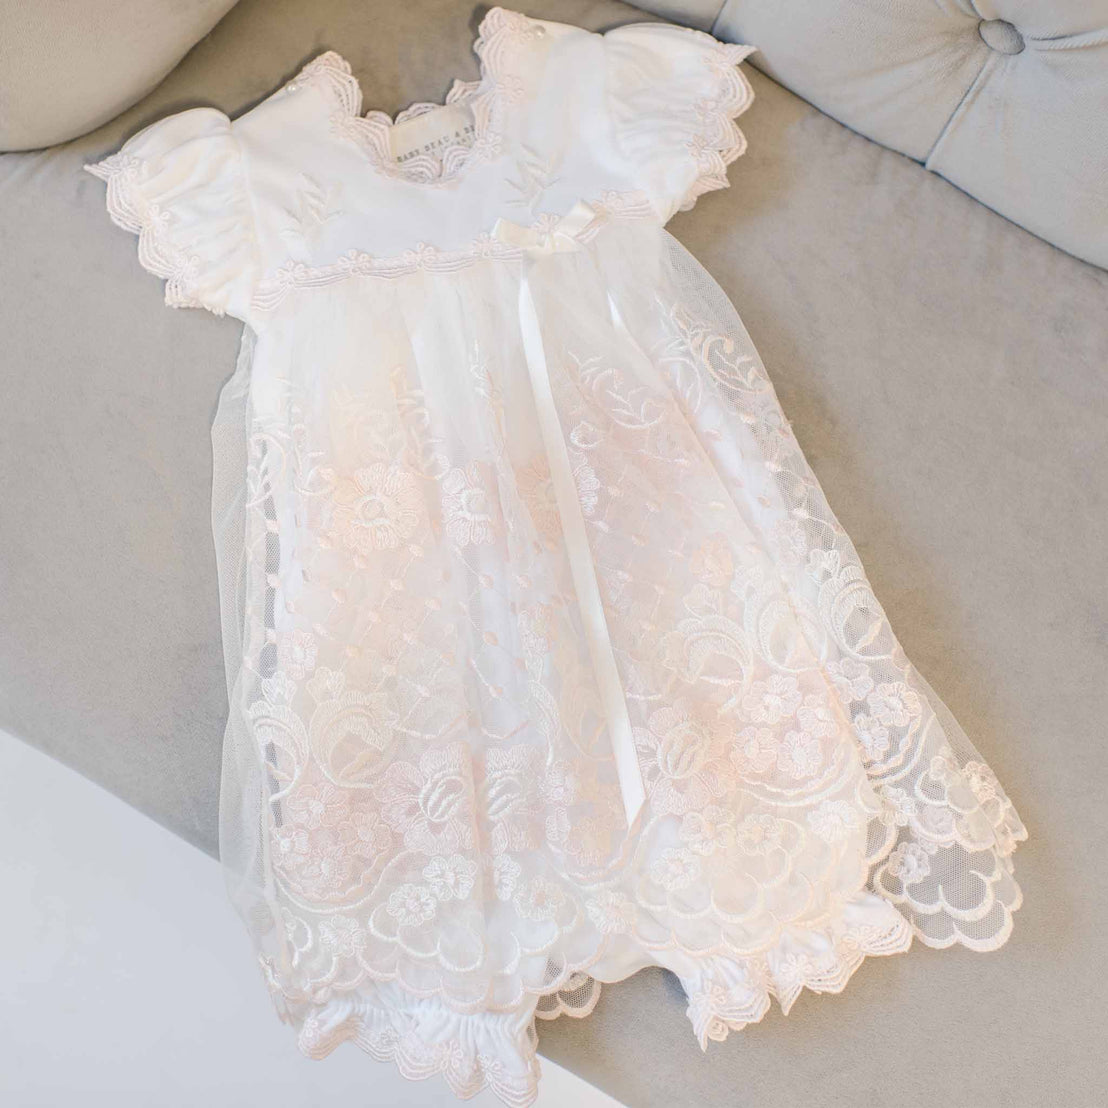 A delicate white Joli Romper Dress with intricate lace detailing and a sheer overlay, displayed on a soft beige sofa, perfect for an upscale boutique.